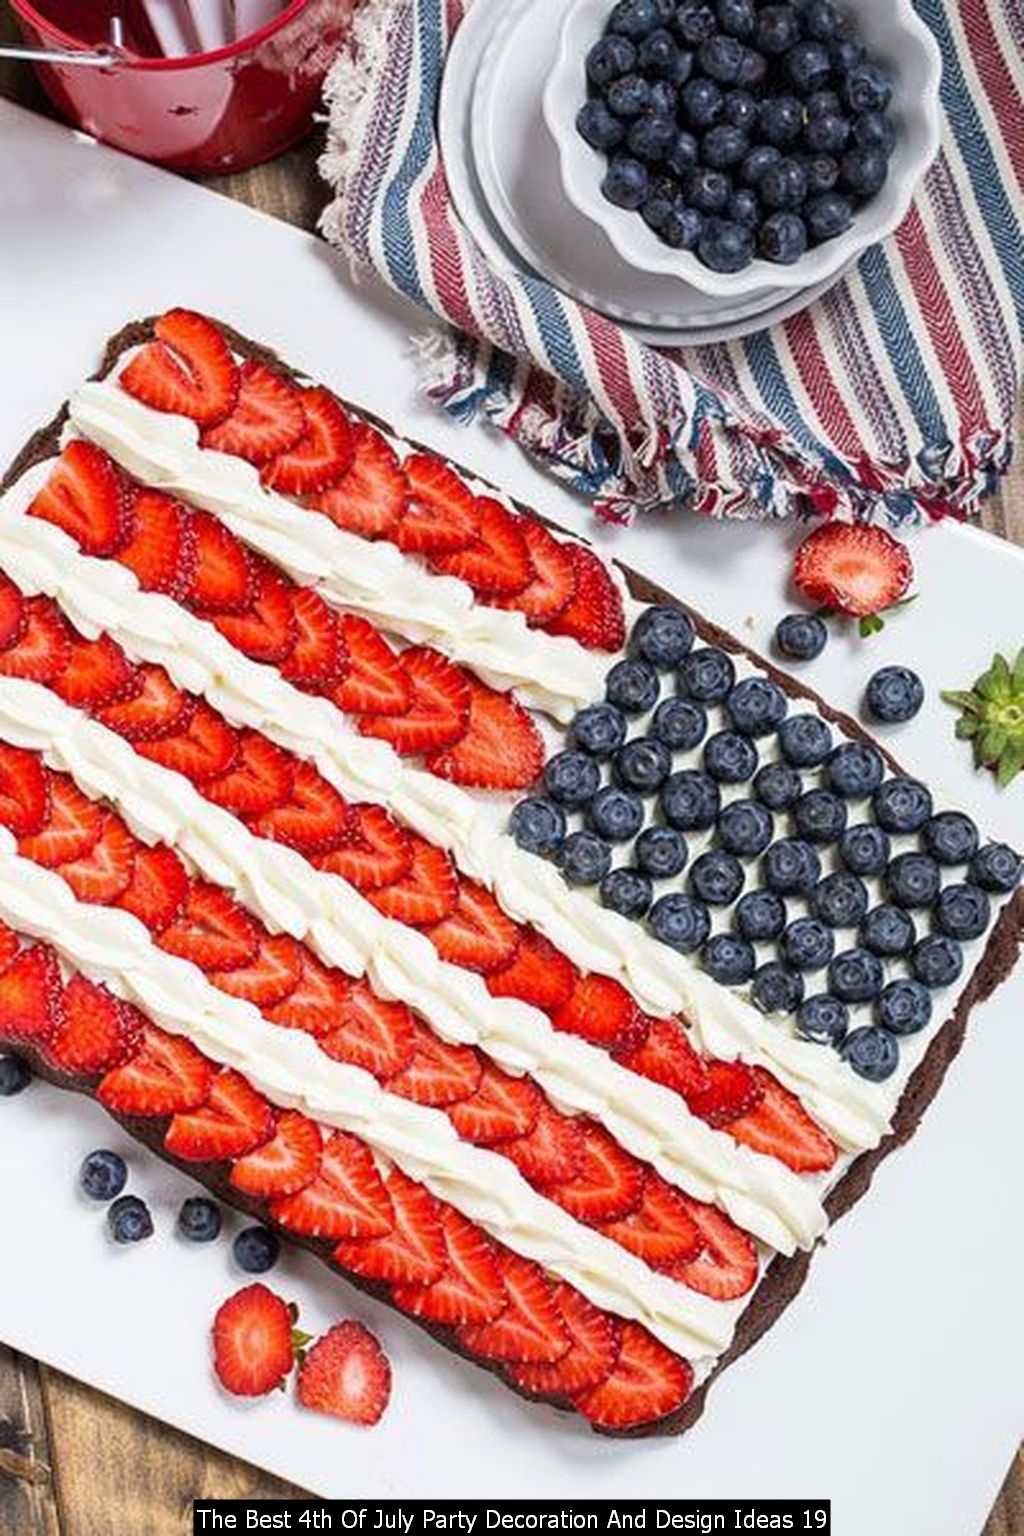 The Best 4th Of July Party Decoration And Design Ideas 19